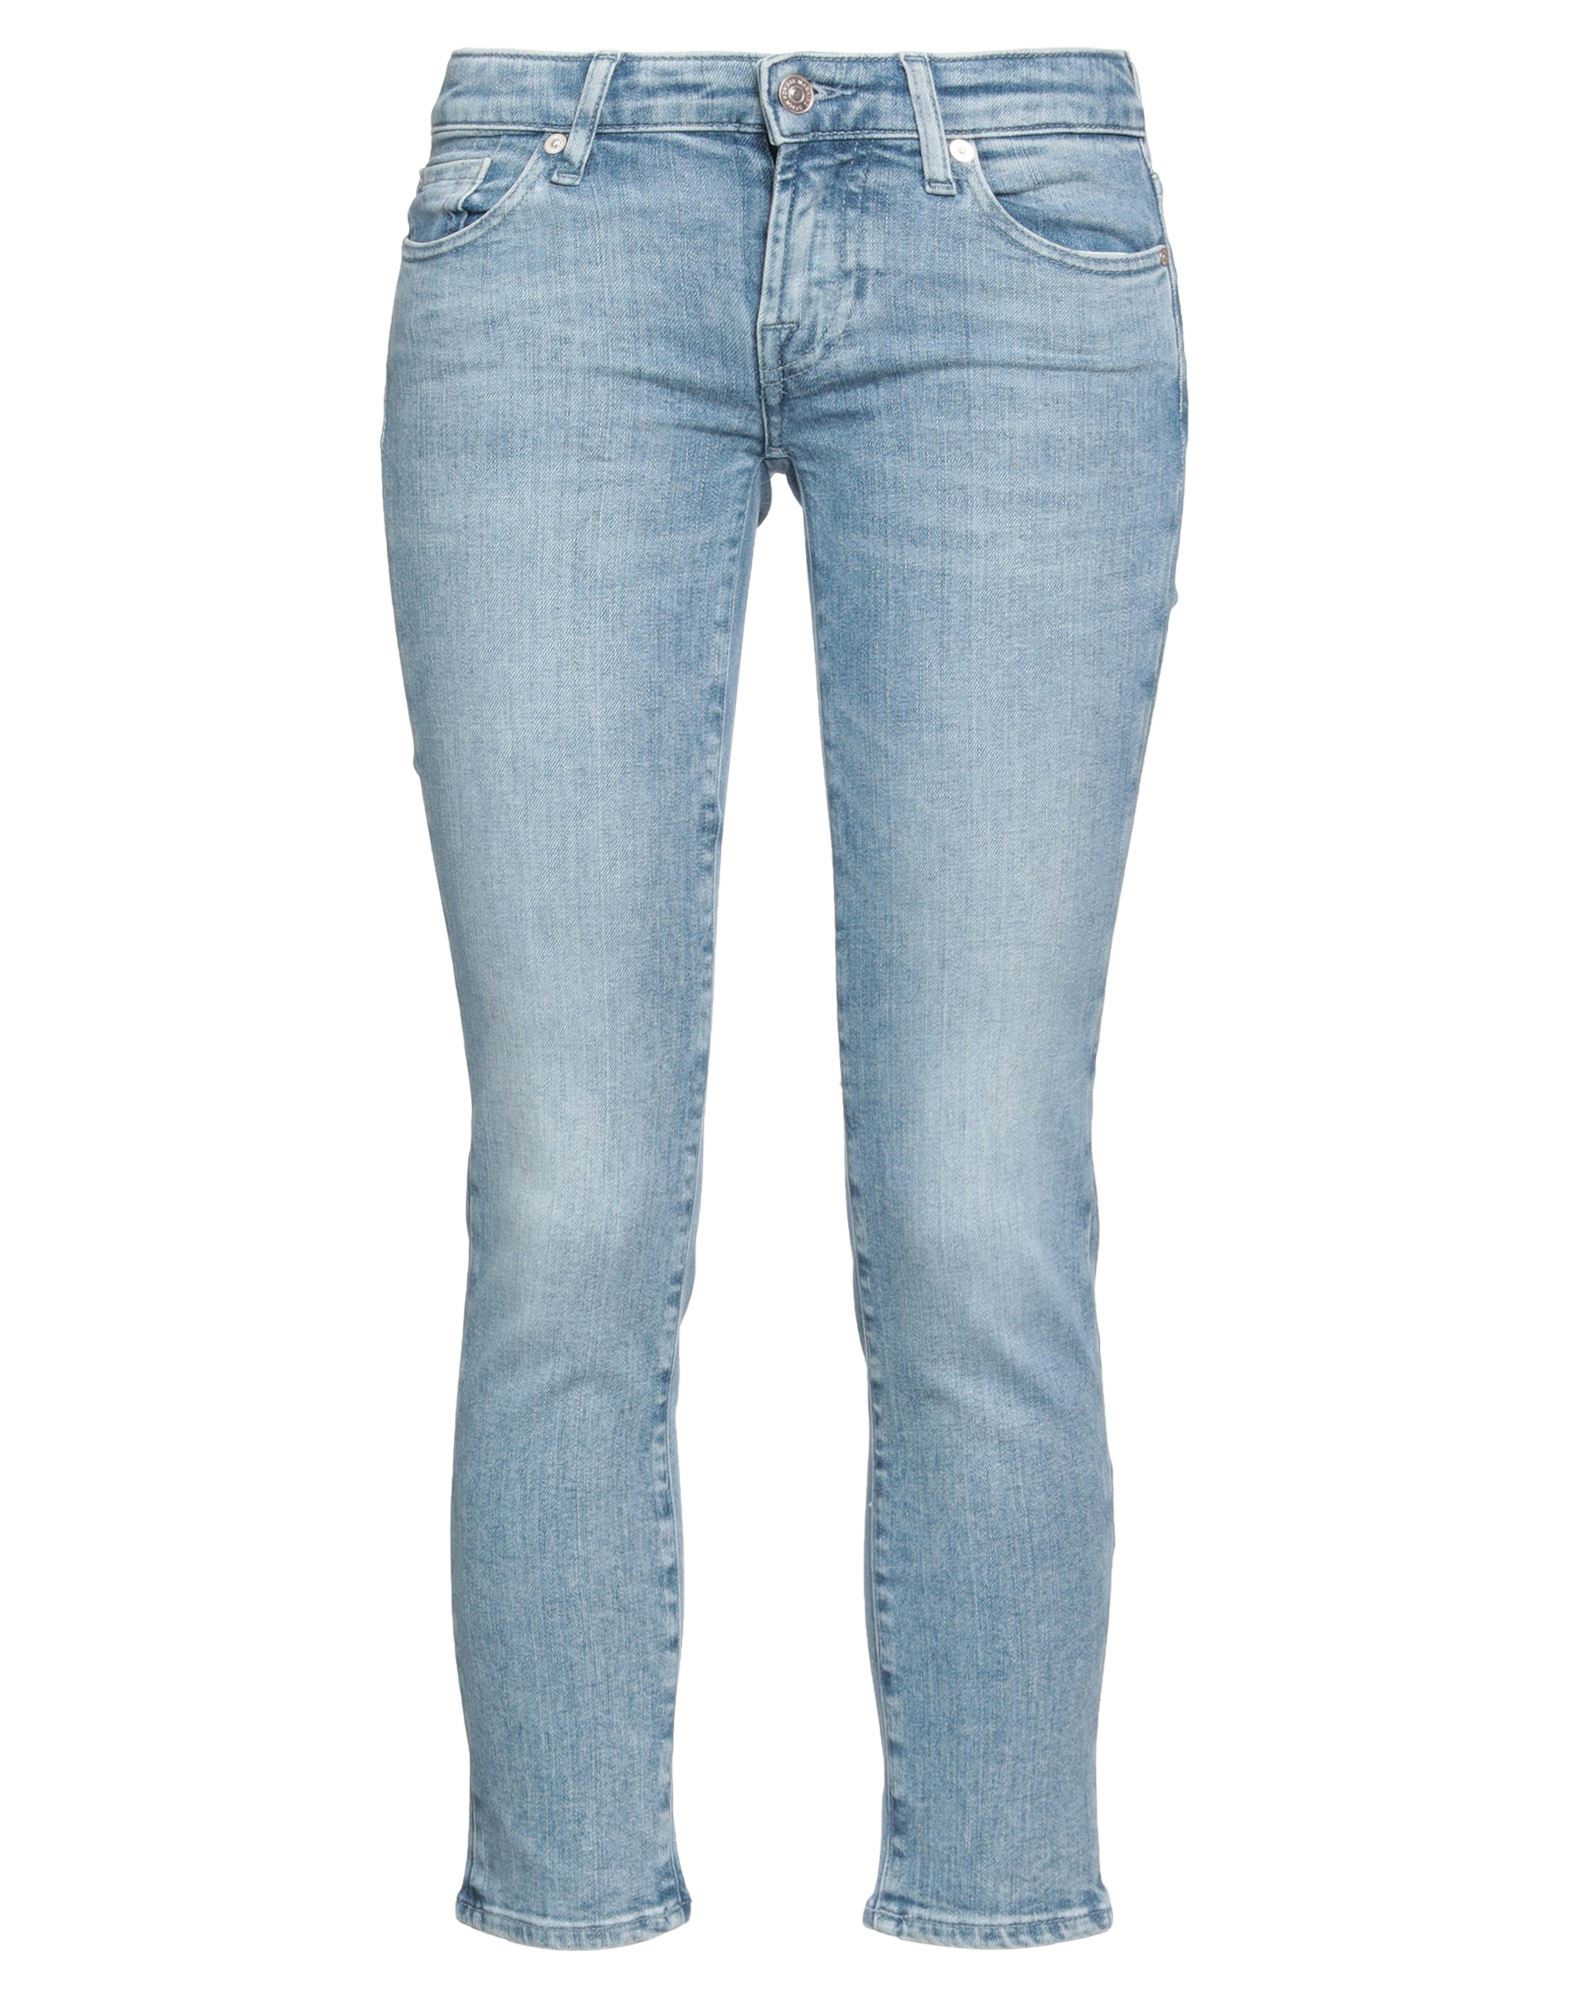 7 For All Mankind Denim Cropped In Blue